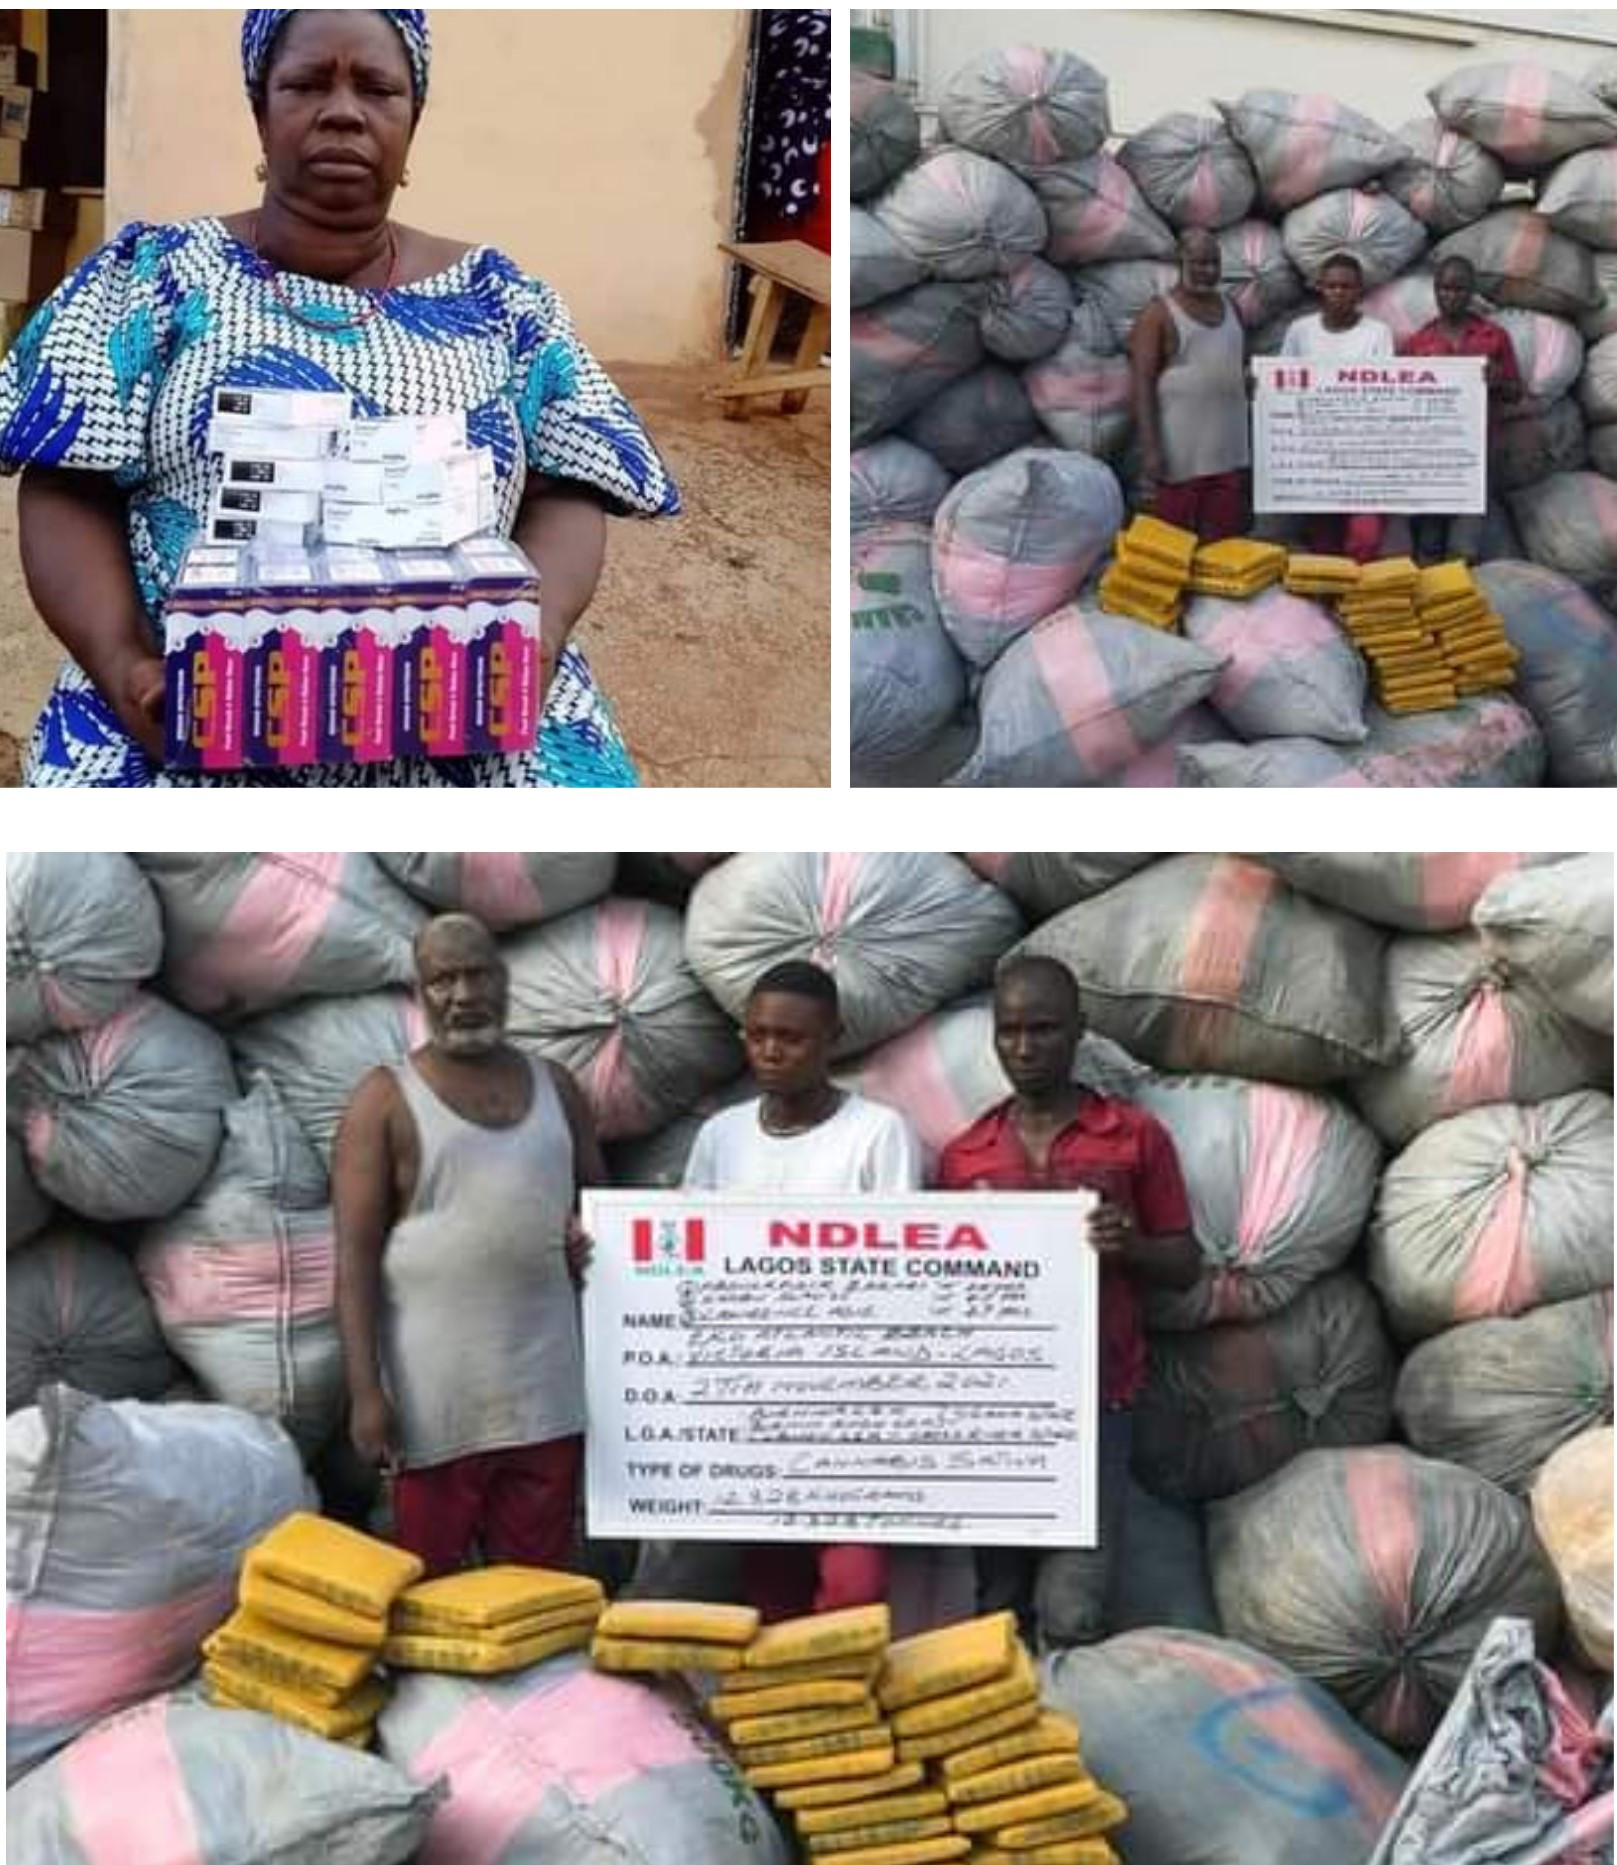 NDLEA Has Confiscated 12,385 kg Of Loud Cannabis Smuggled Via Waterways Into Lagos